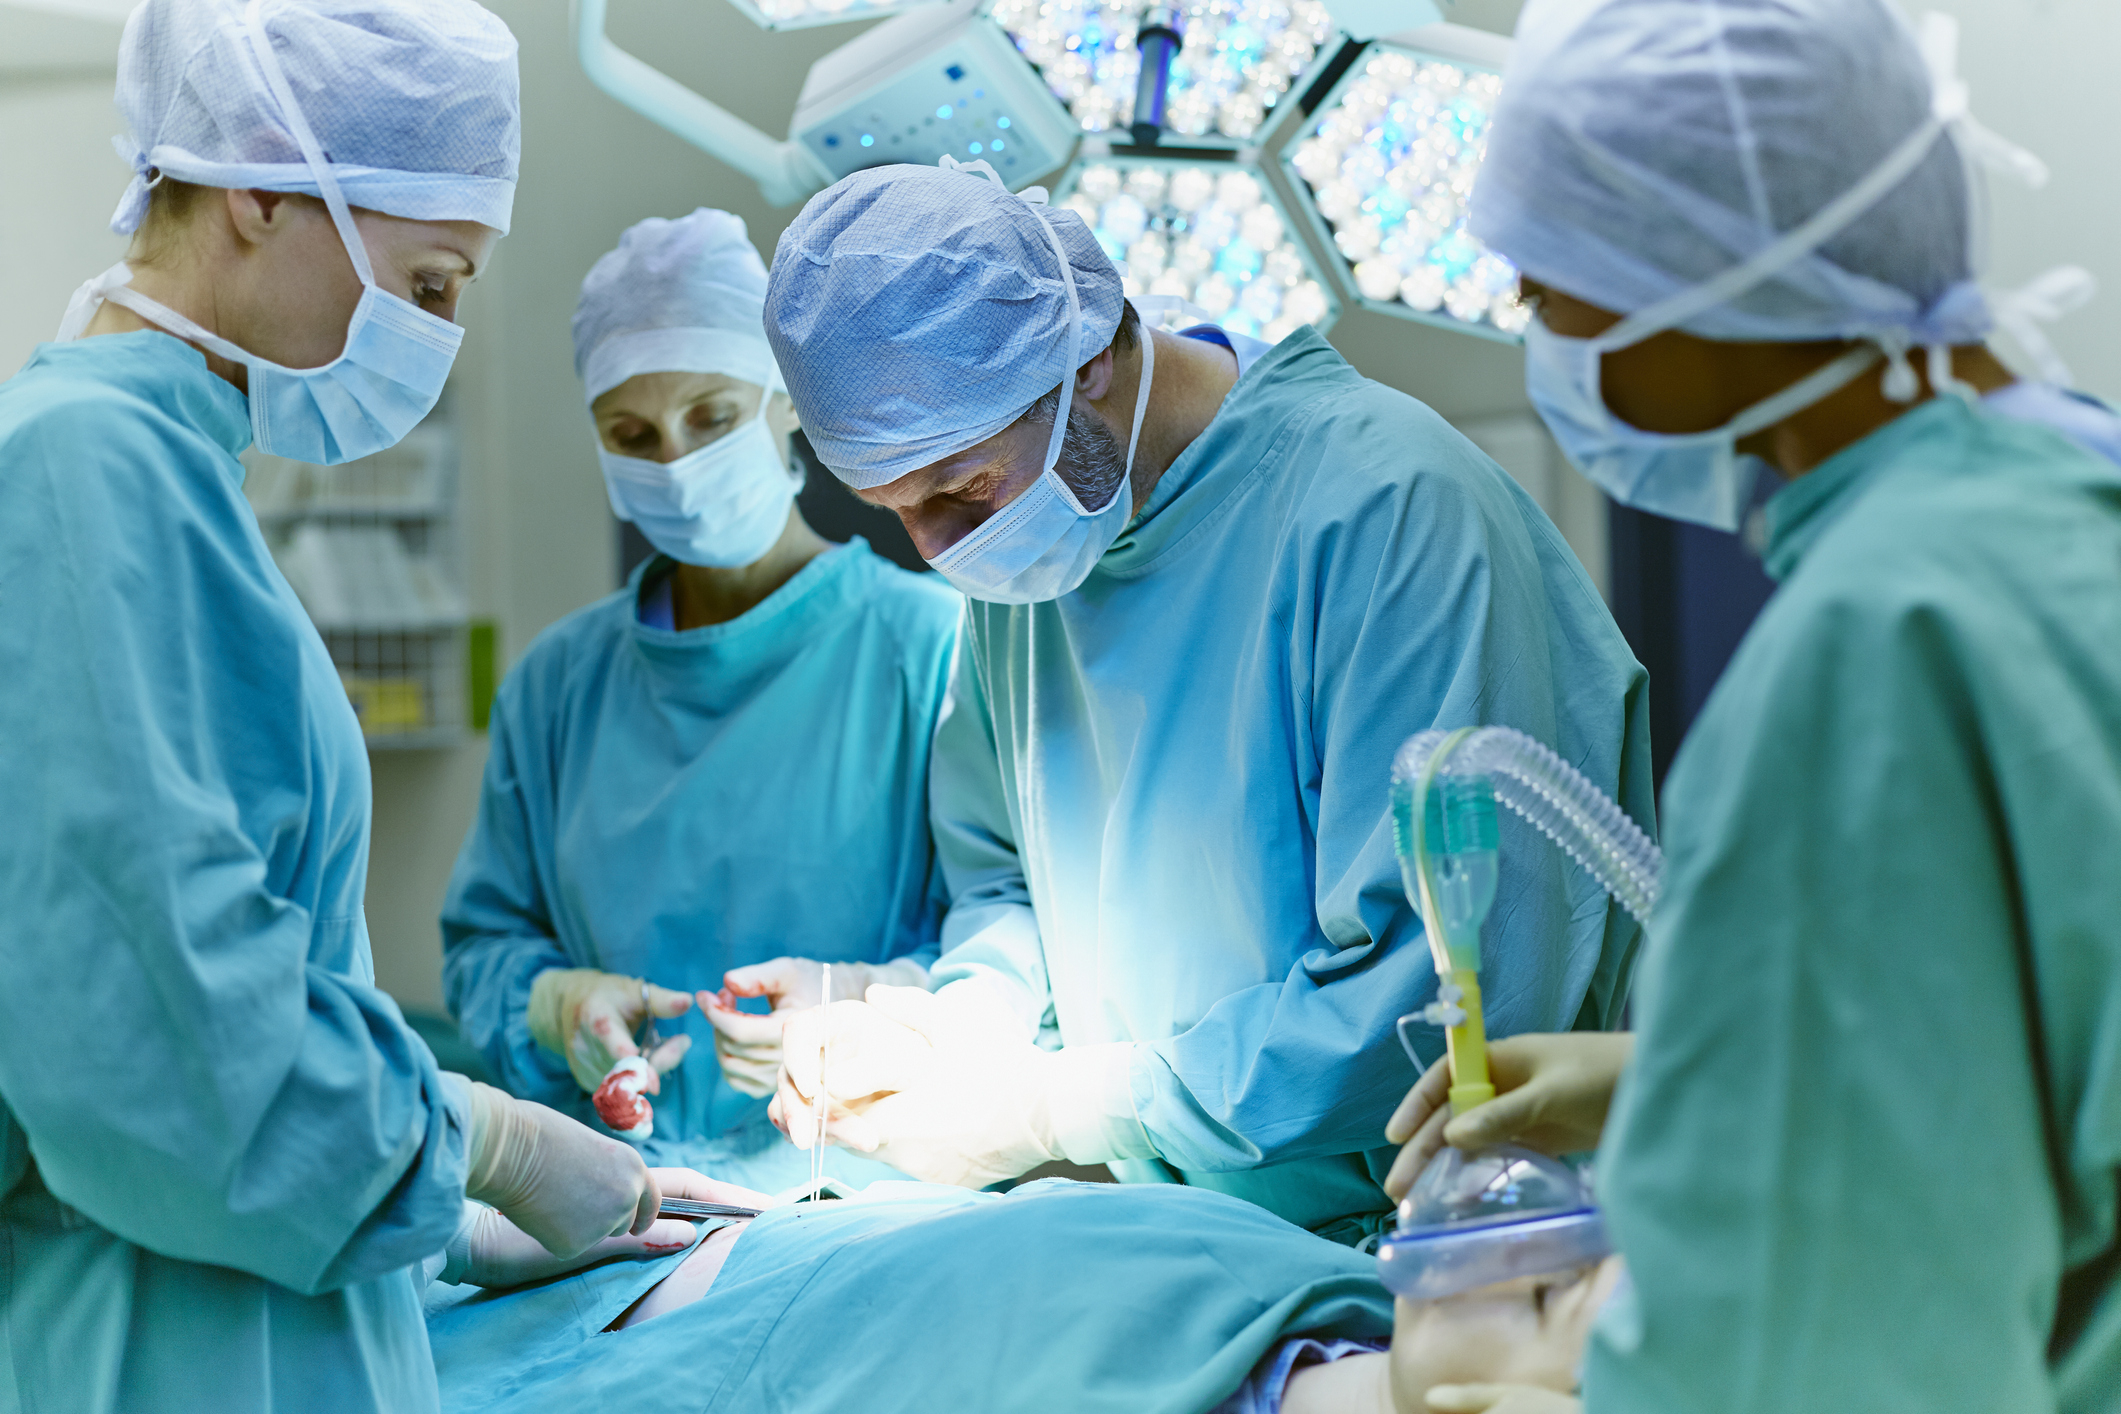 Surgeons in scrubs performing an operation in a well-lit operating room